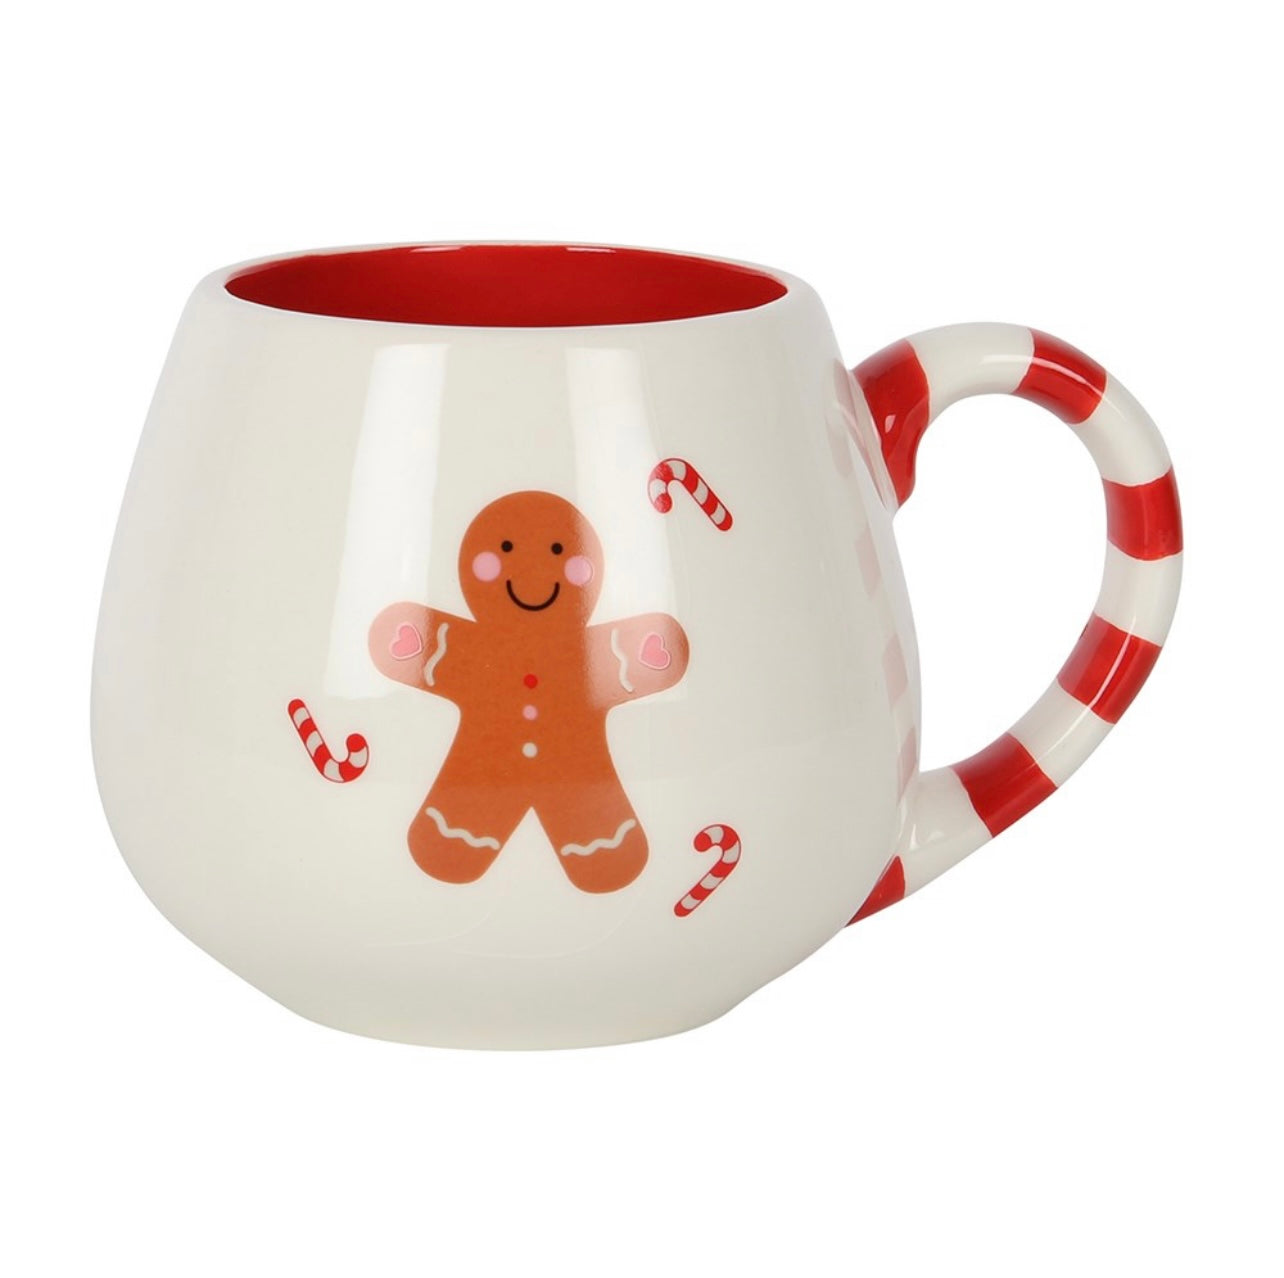 Festive Christmas Mug: Gingerbread and Candy Cane Delight